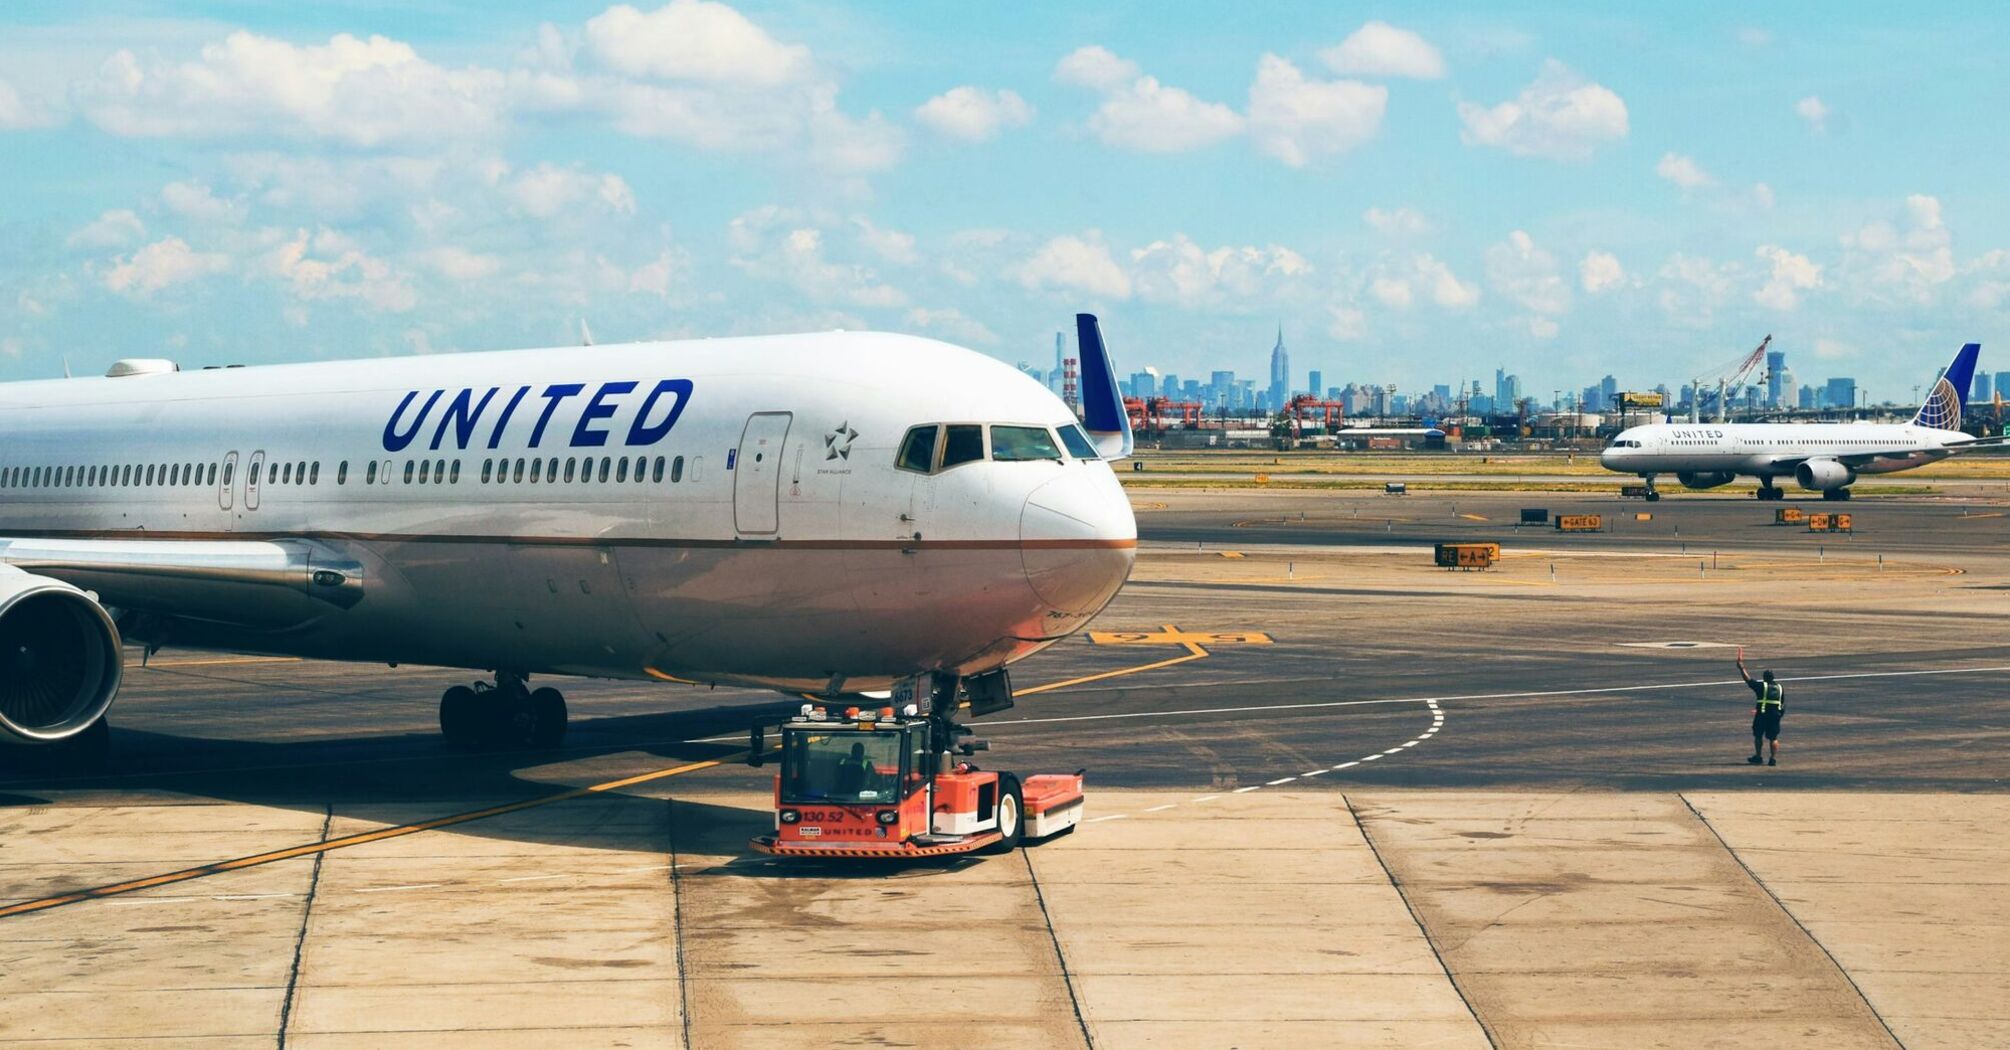 United Airlines airplane on the tarmac